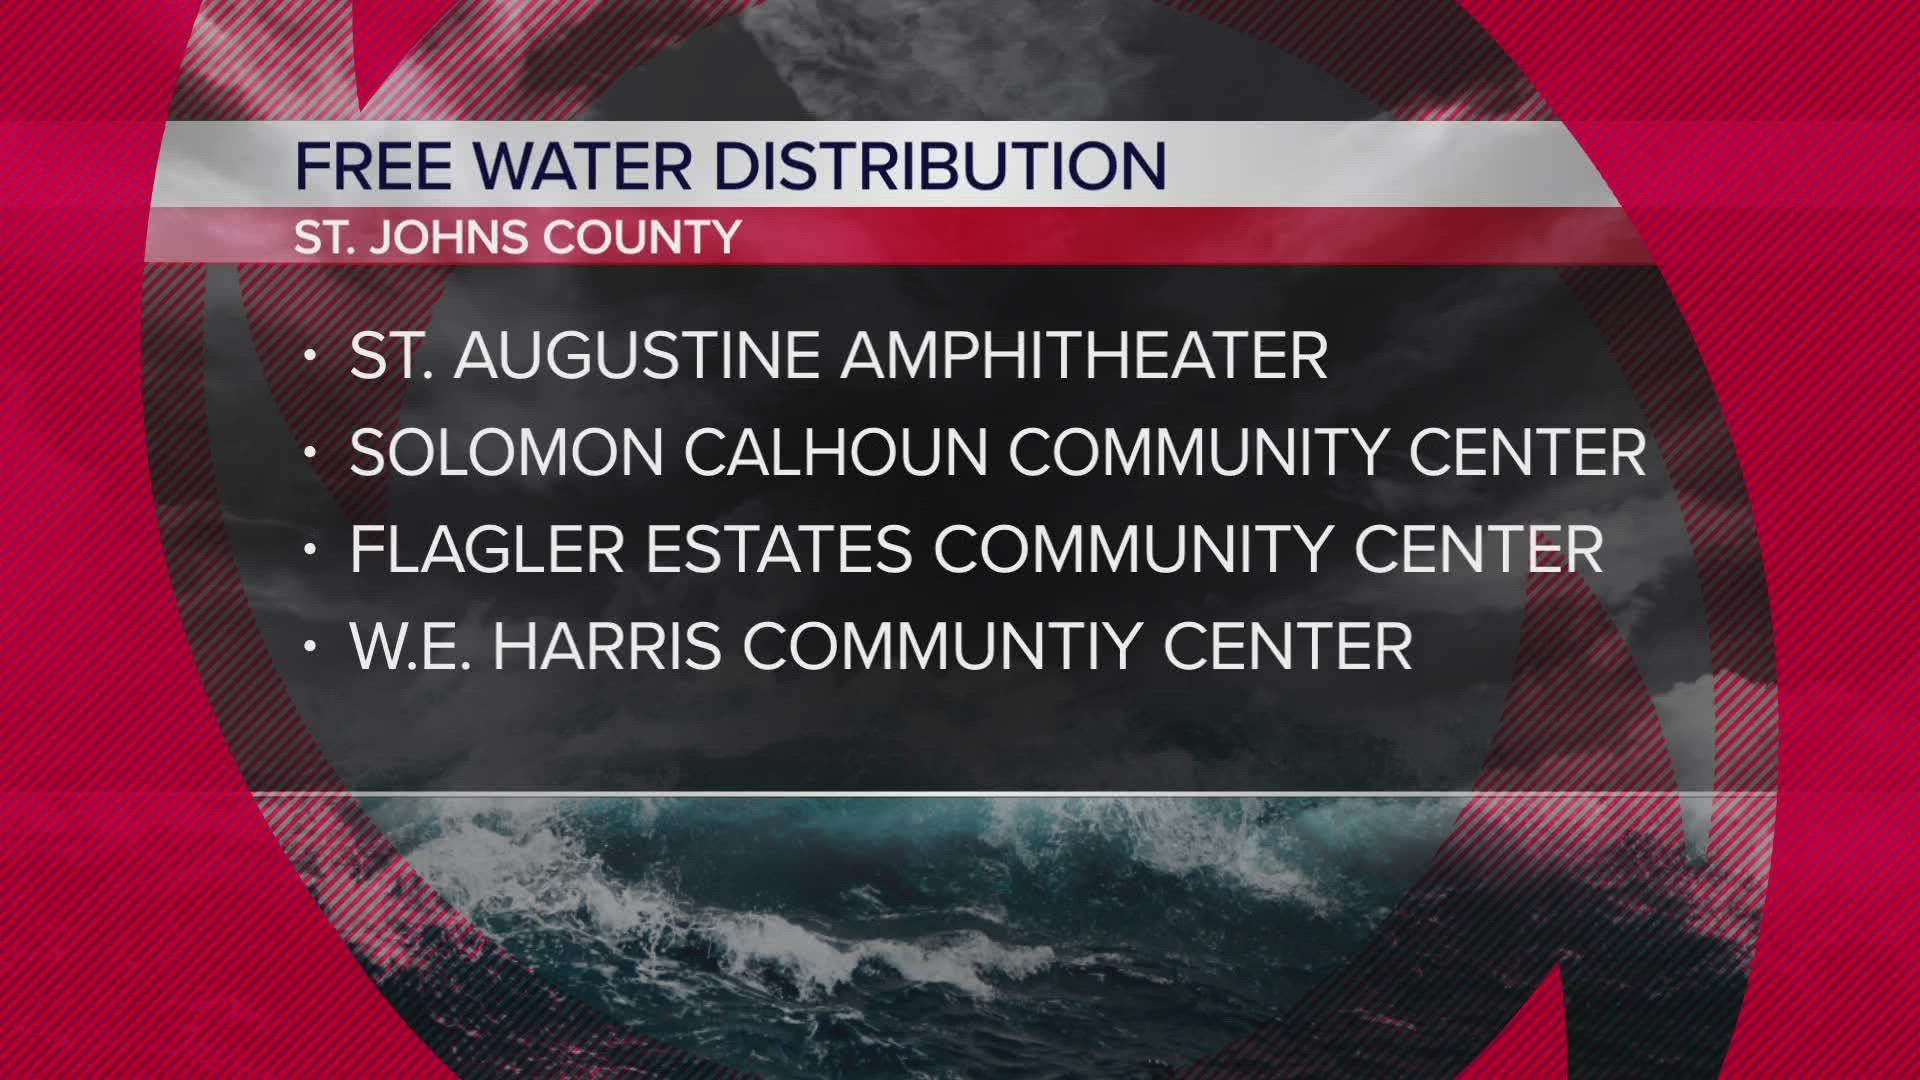 The water is available in St. Augustine and Hastings.